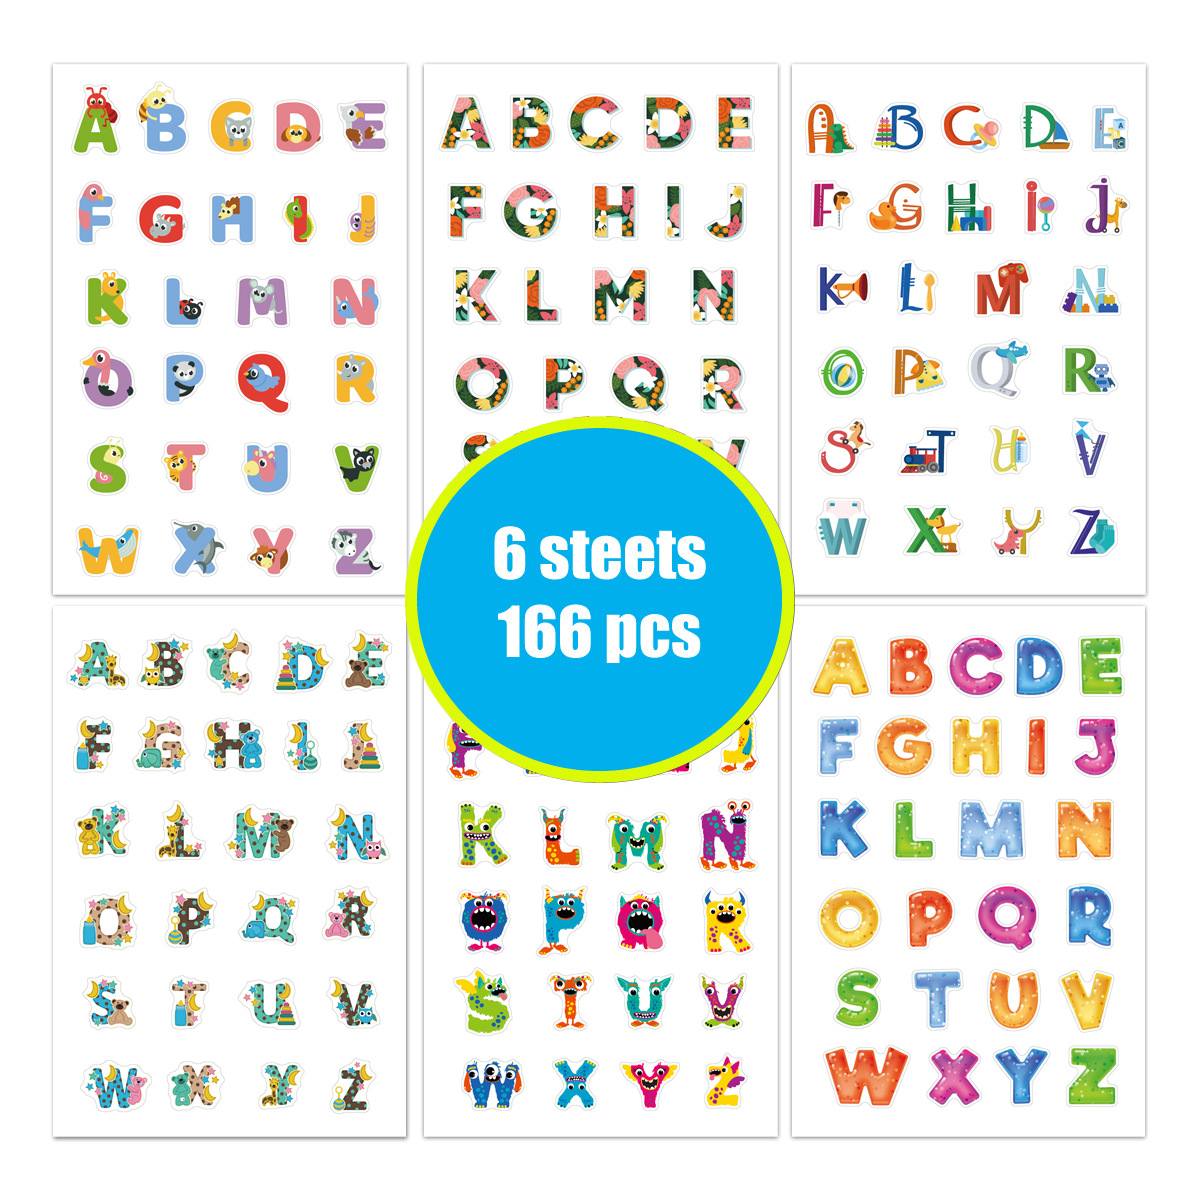 Colorful Alphabet Number Stickers Self Adhesive Letter Stickers DIY Number Letter Stickers Decorative Craft Scrapbook Stickers